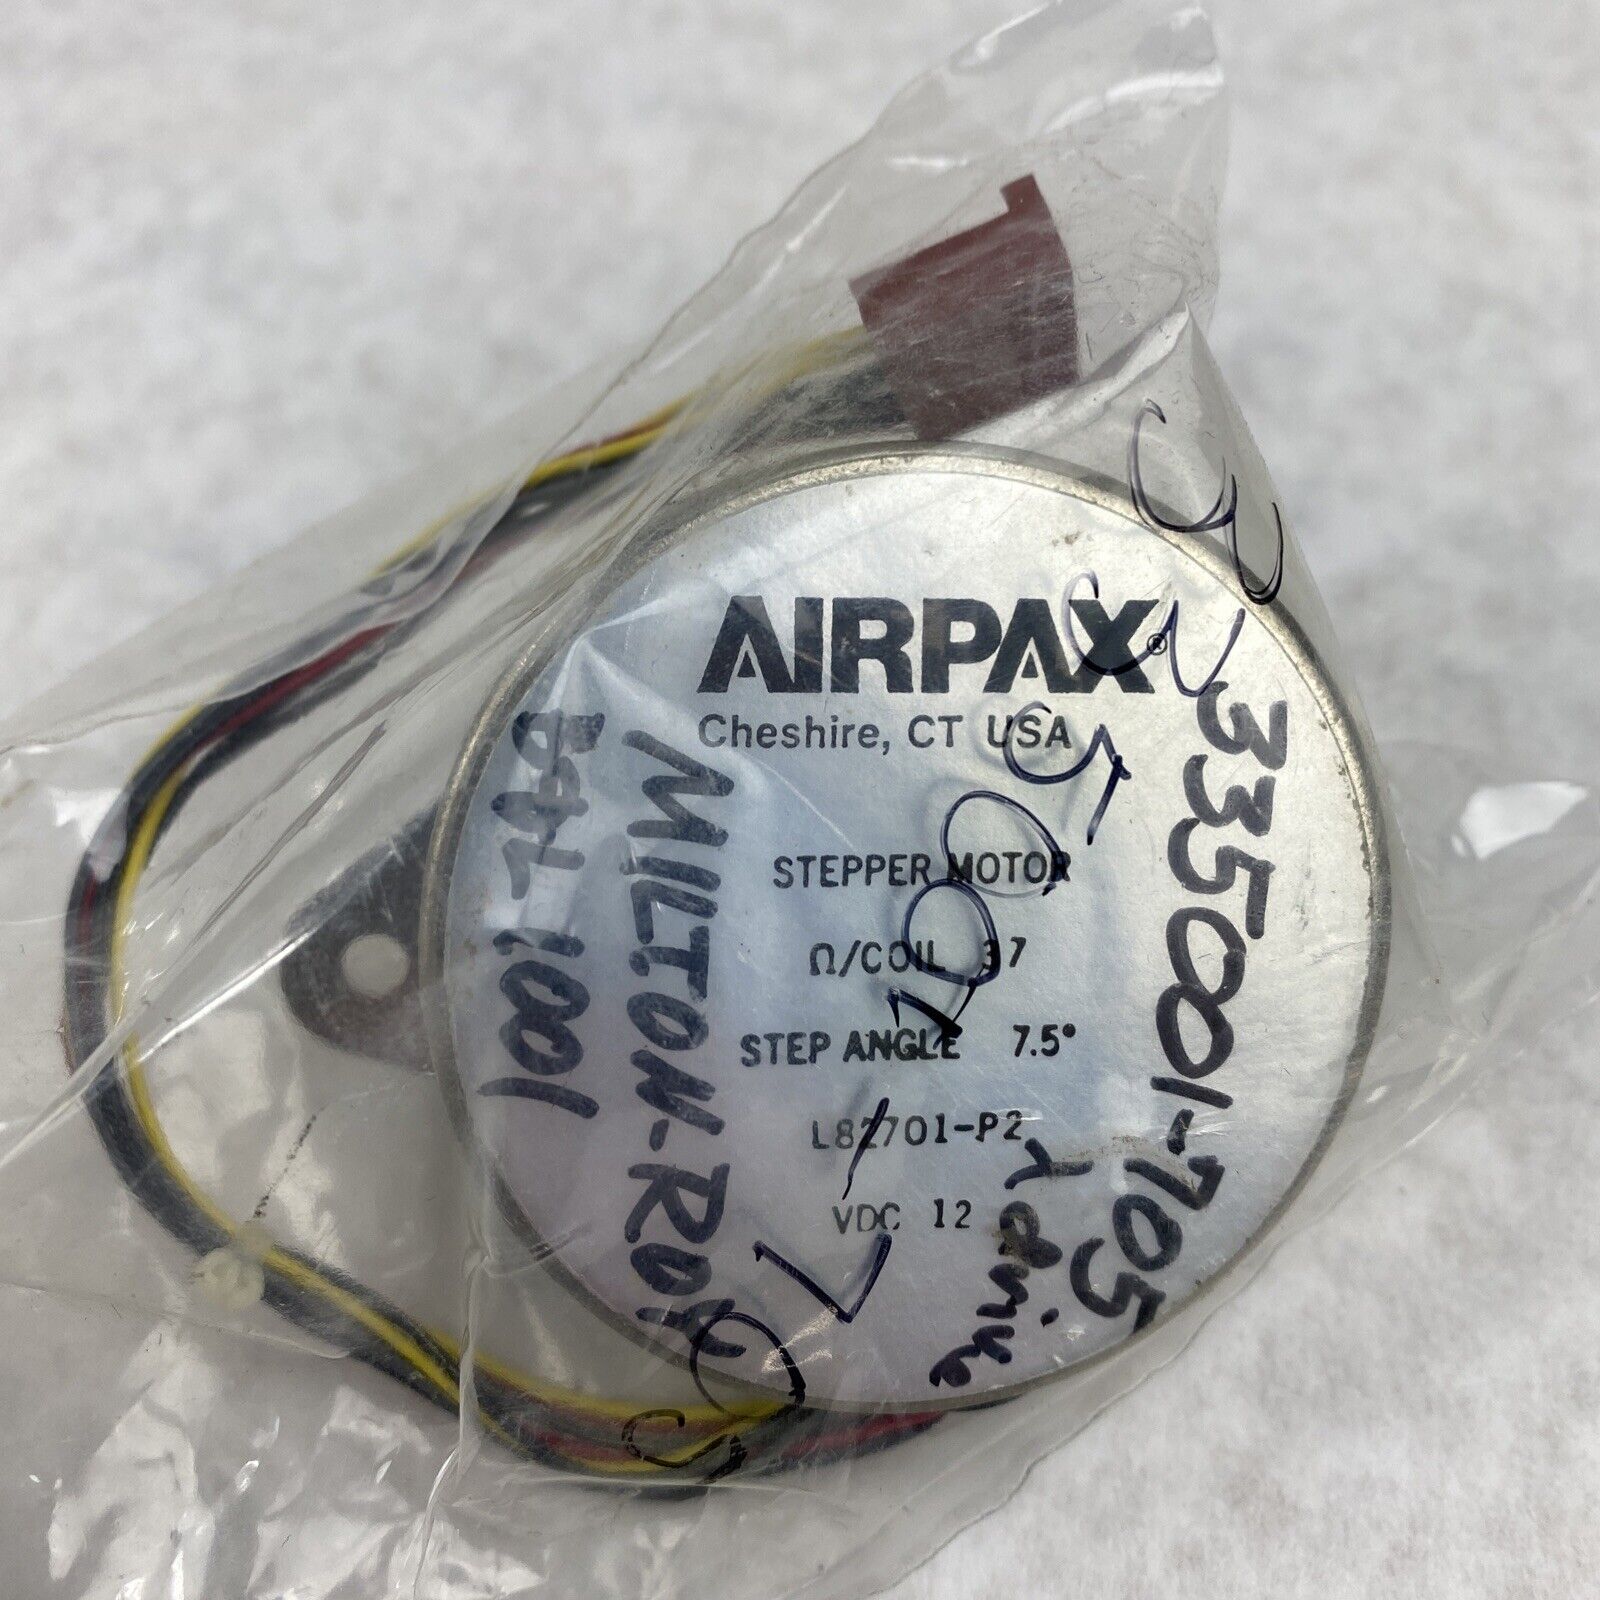 Airpax L82701-P2 Stepper Motor Coil 37 Step Angle 7.5" VDC 12